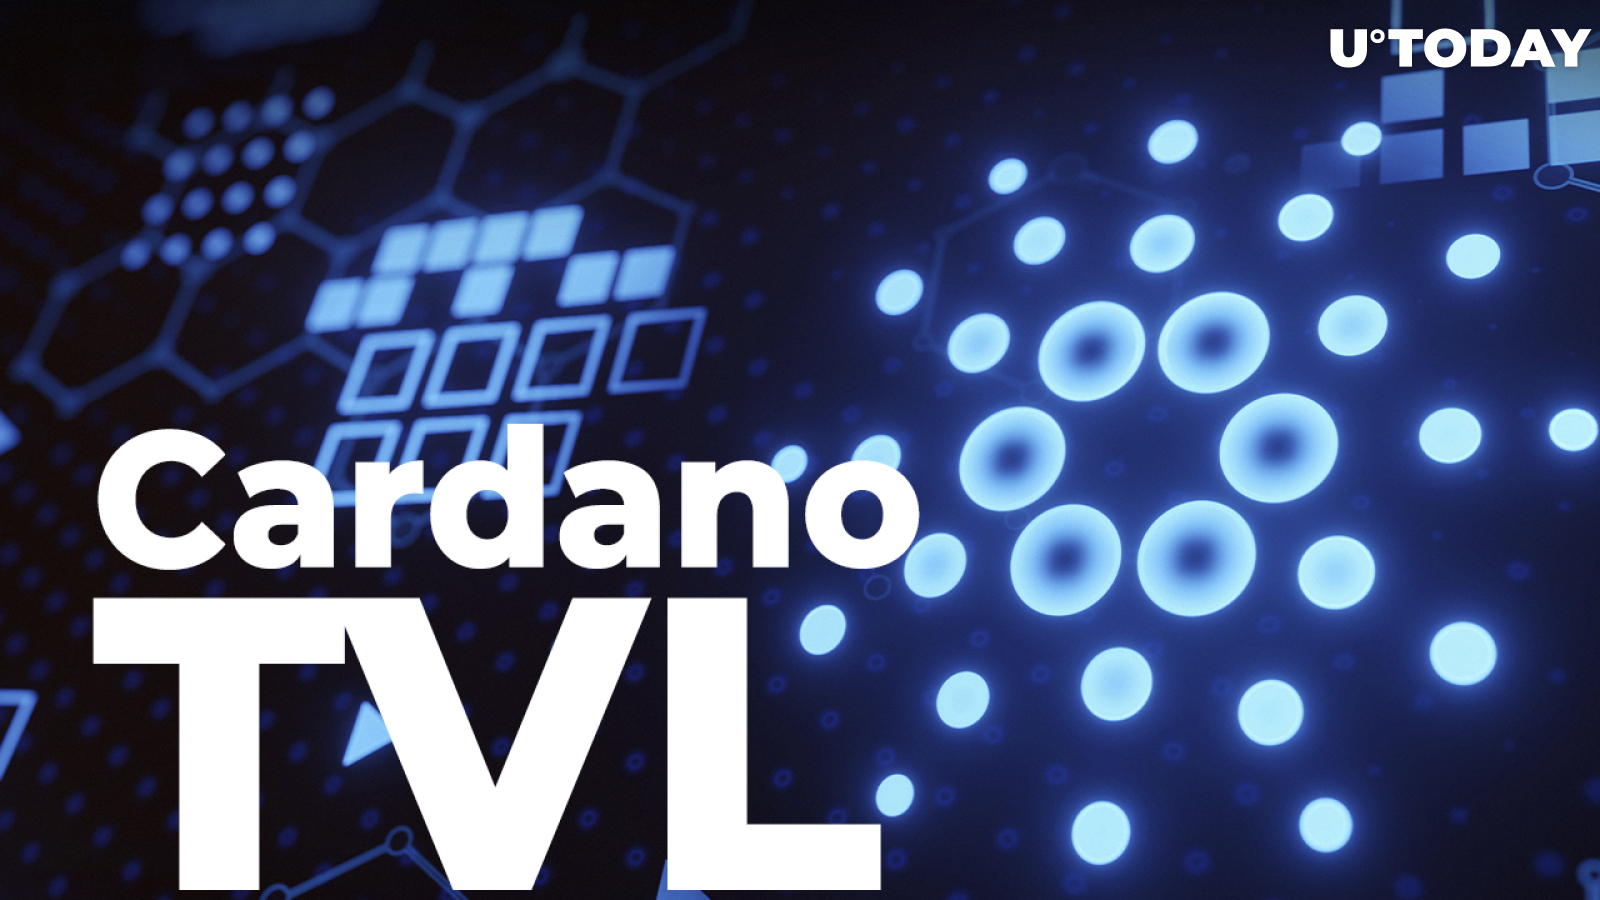 Cardano TVL "Will Fly" When These Conditions Are Met: Cardano Whale